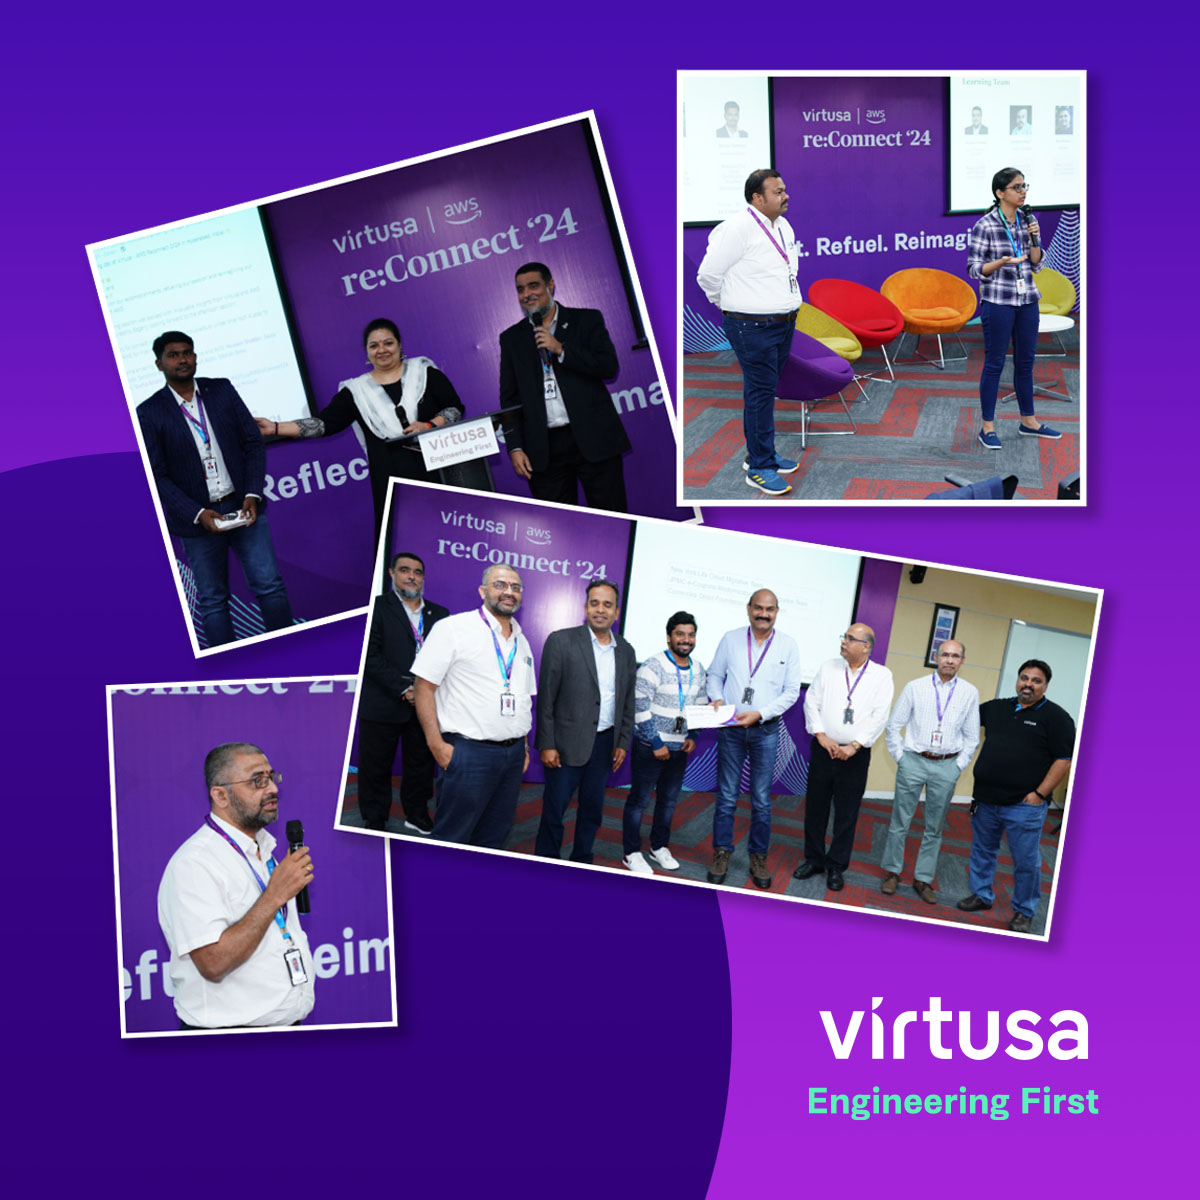 Recently, Virtusa & AWS hosted ”Virtusa | AWS re:Connect '24” in Hyderabad. With 520+ attendees, we explored the future of work with GenAI, reflecting on achievements, fueling passion, and reimagining the future.
@awscloud | #EngineeringFirst #AWS #reConnect24 #VirtusaAWSDay